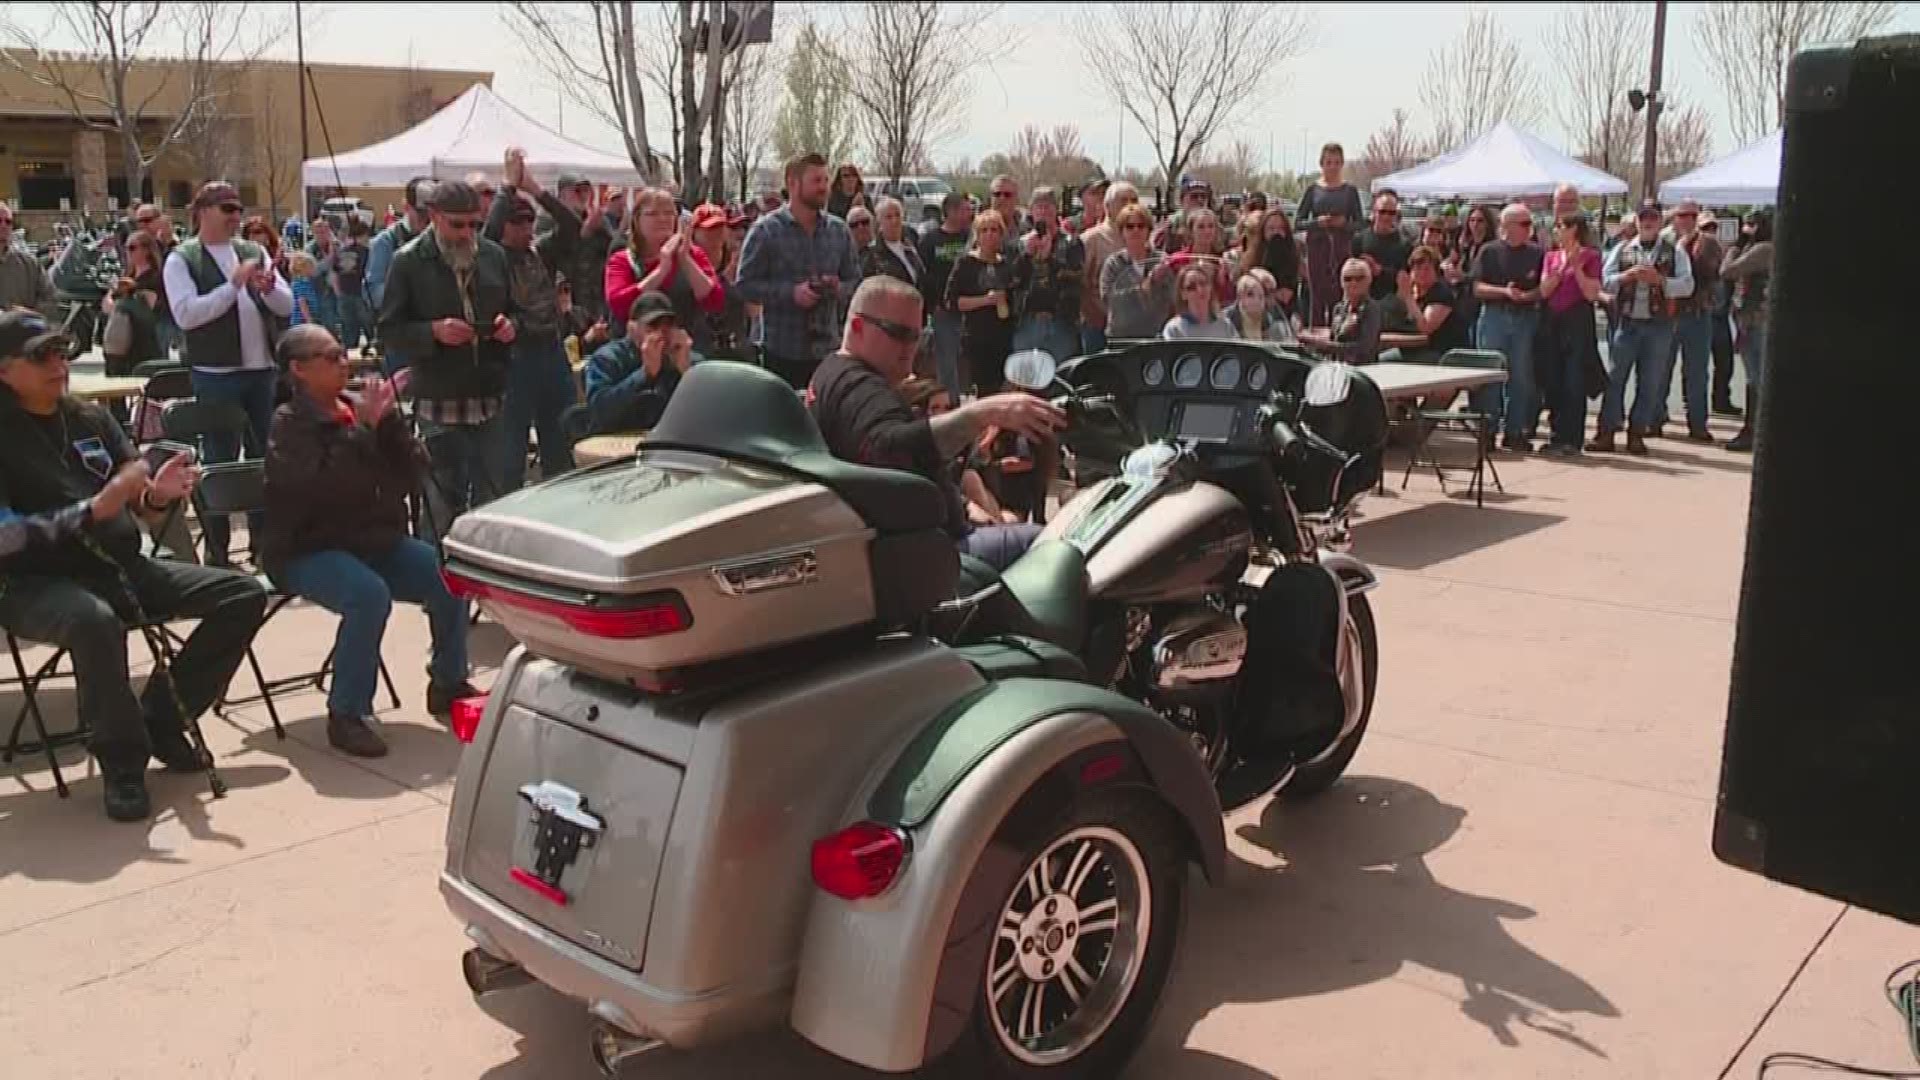 The Boise Police officer who became paralyzed and lost part of his left leg after being shot in the line of duty received an adapted motorcycle, paid for with donations from local businesses and individuals.